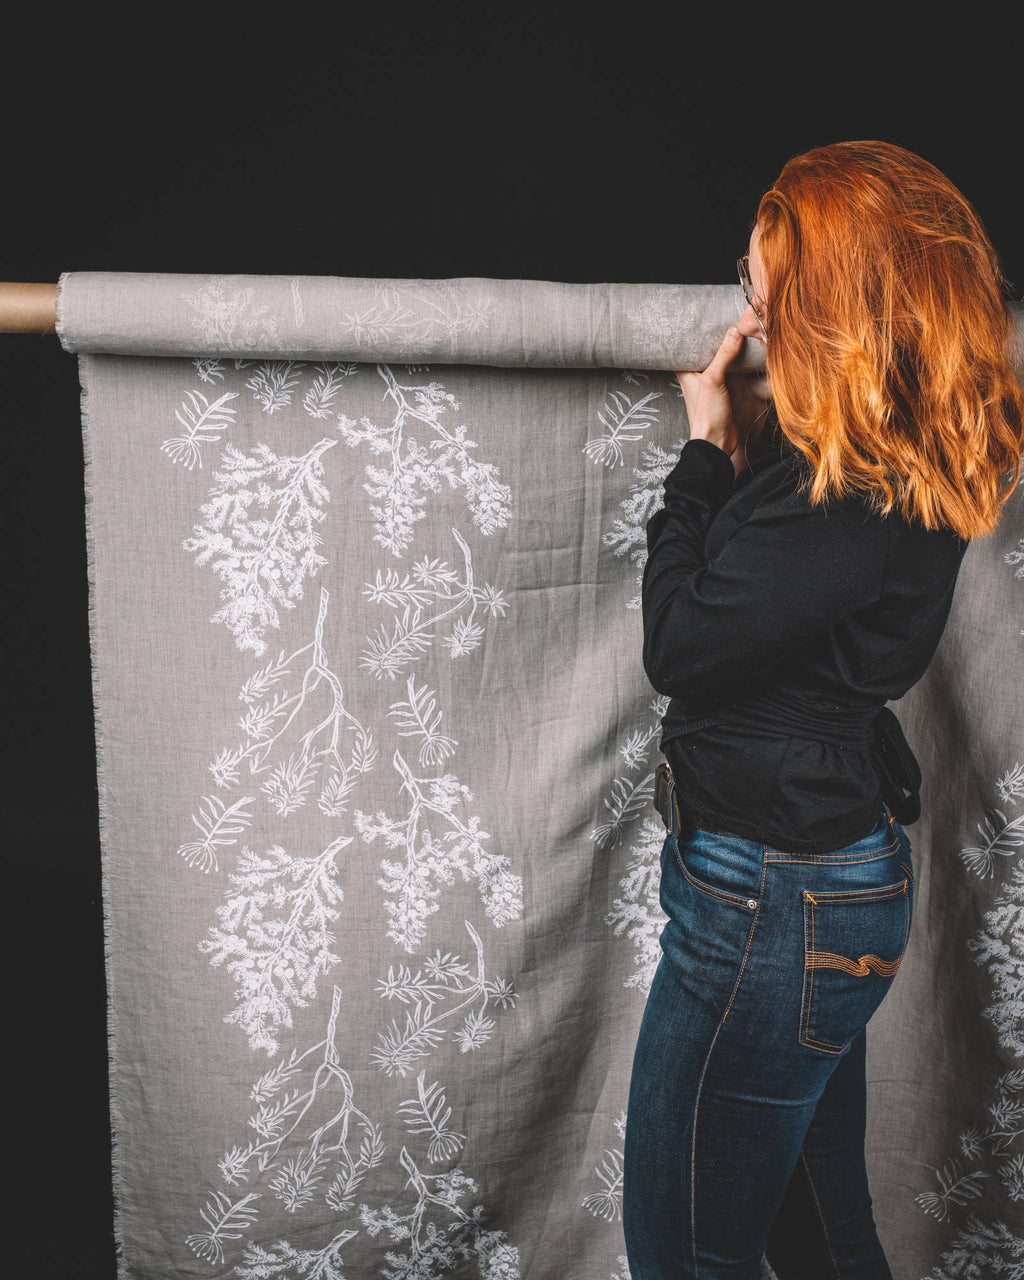 Do you have something special in mind and feel empowered by making it yourself? Woodlands hemp fabric by meter gives you the freedom of creativity to design and make your unique project.